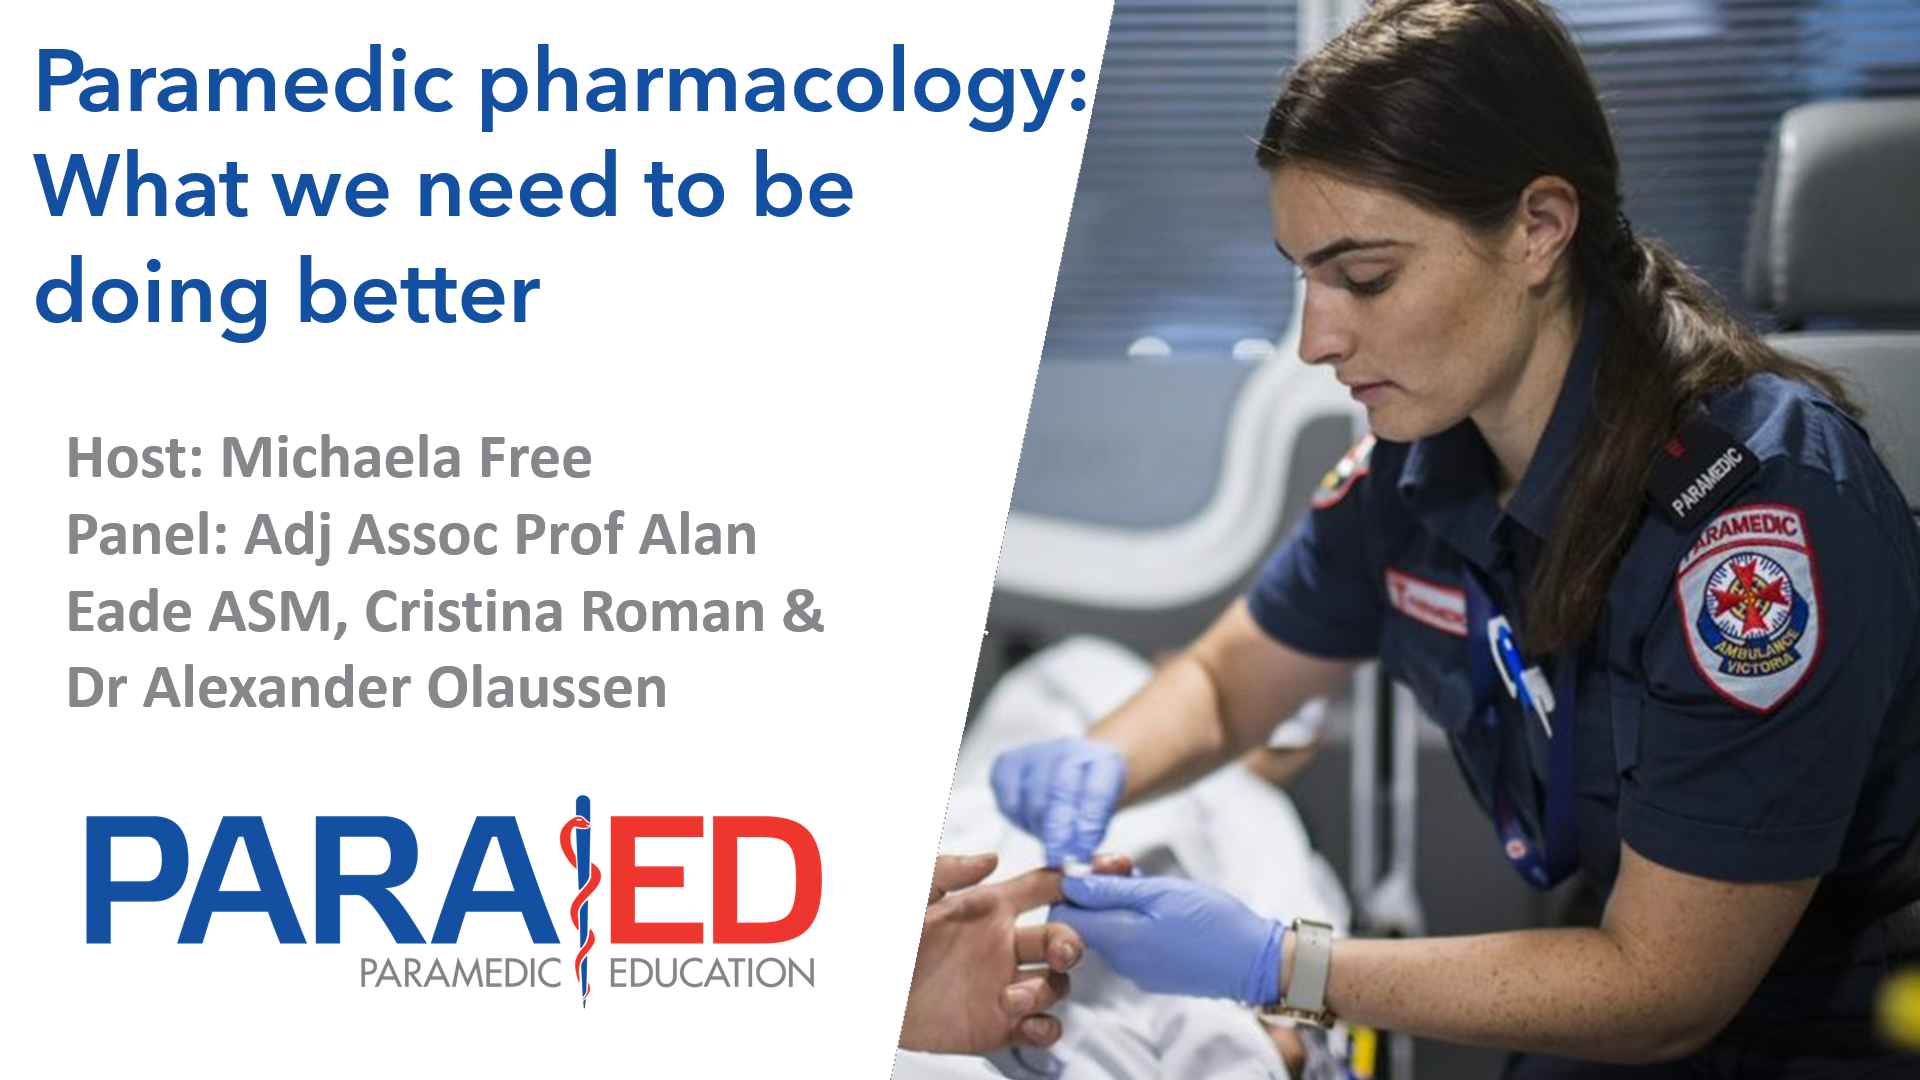 Paramedic pharmacology: What we need to be doing better